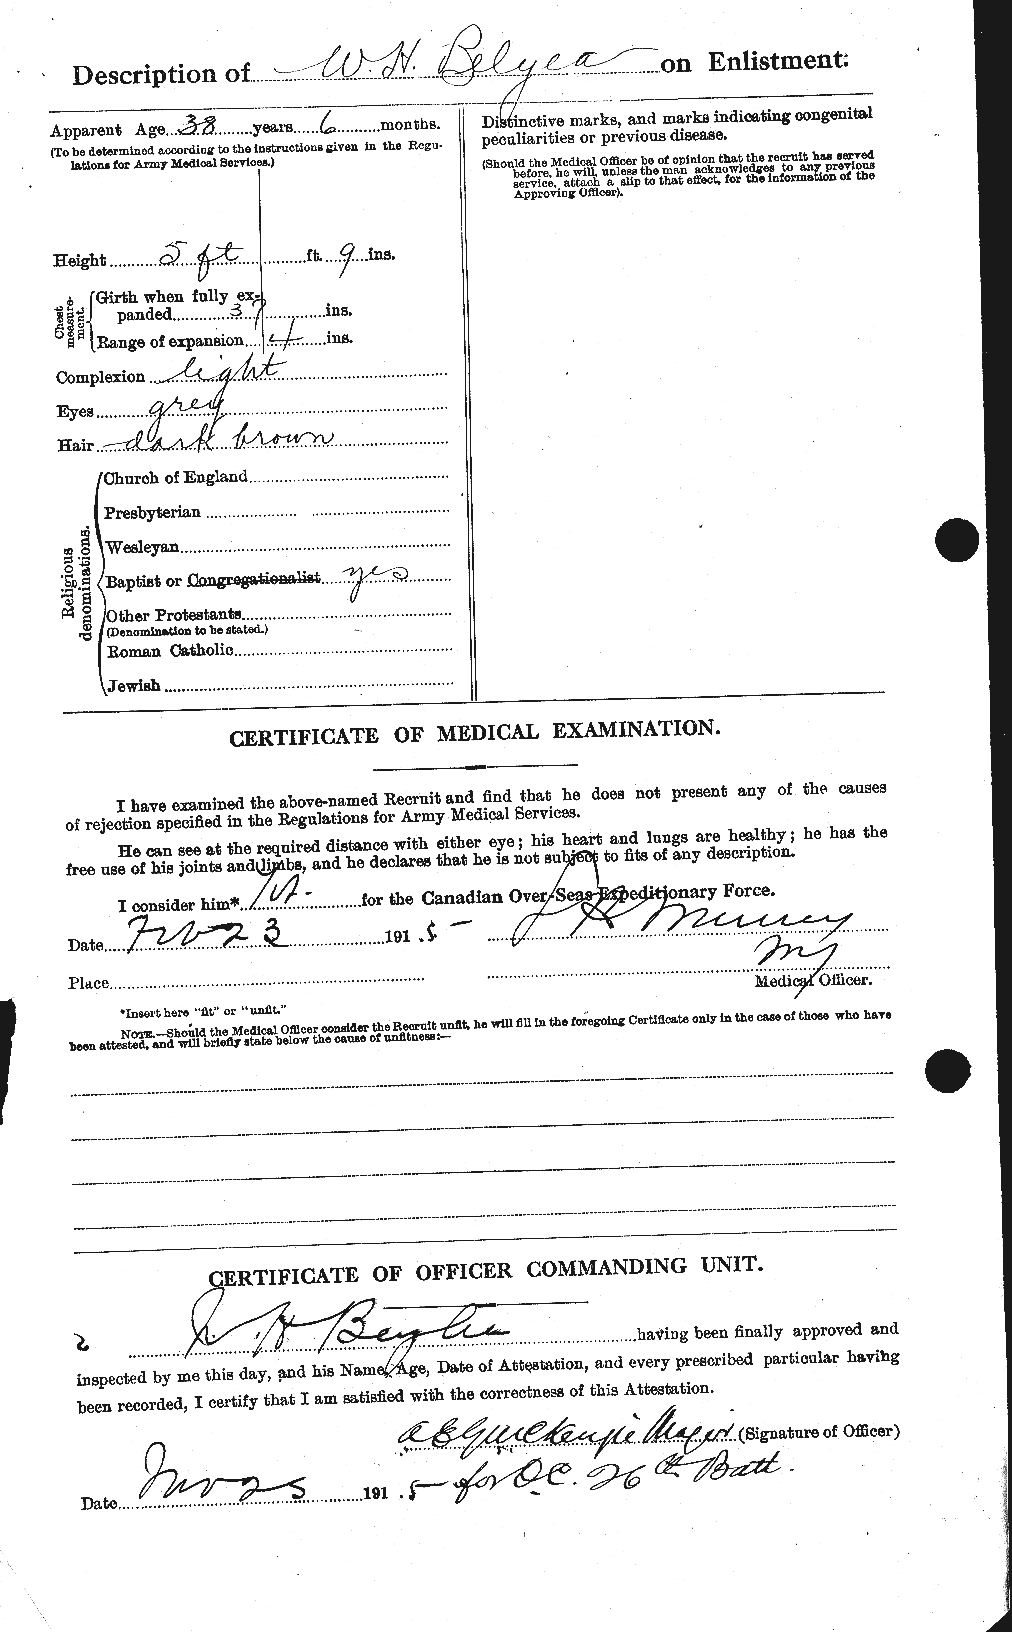 Personnel Records of the First World War - CEF 233713b